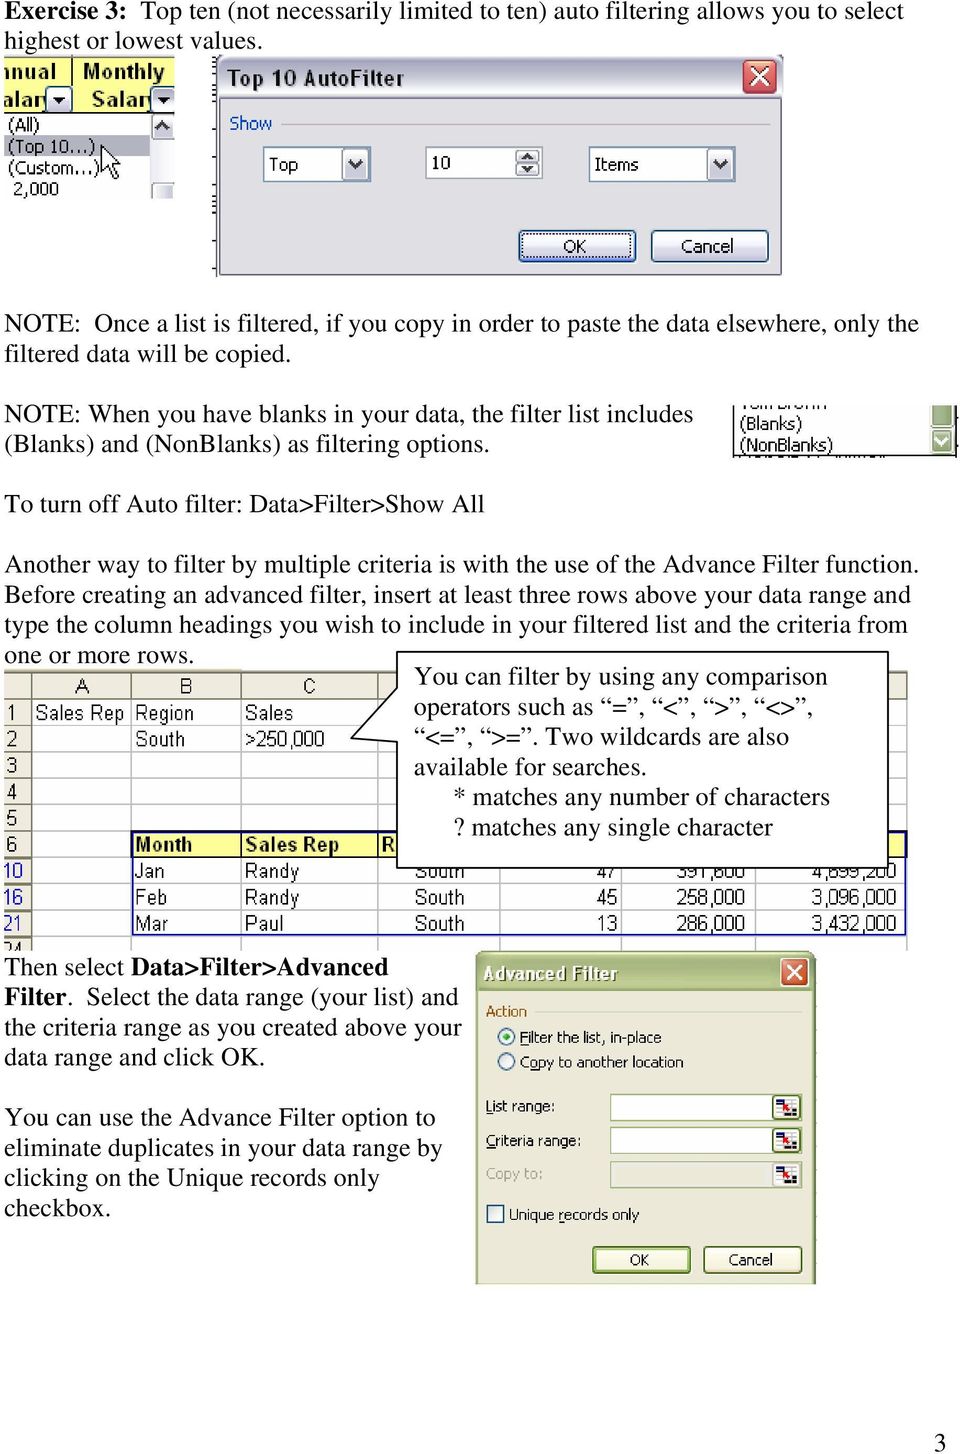 NOTE: When you have blanks in your data, the filter list includes (Blanks) and (NonBlanks) as filtering options.